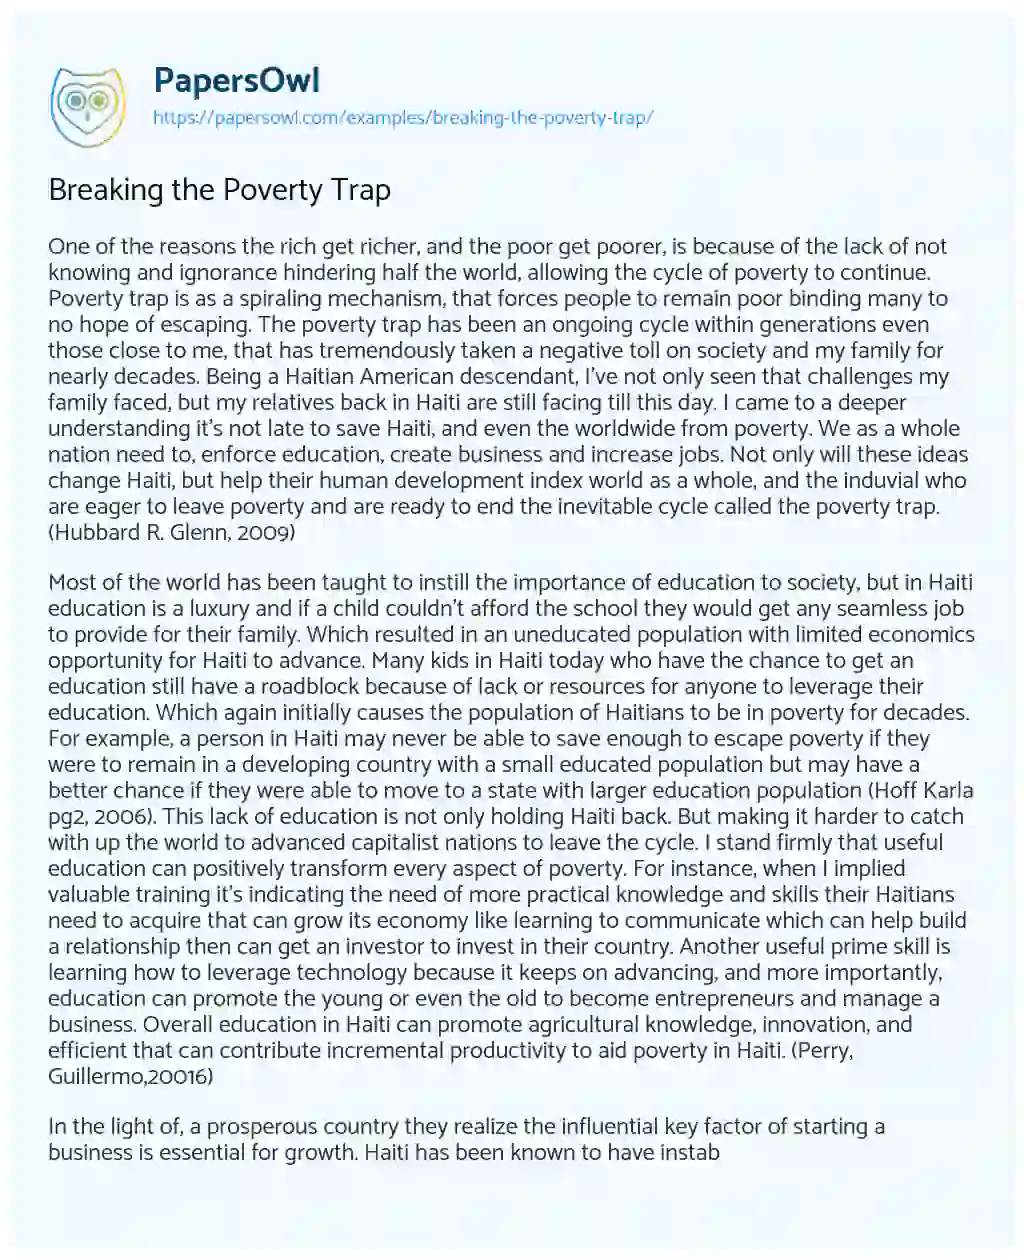 Essay on Breaking the Poverty Trap